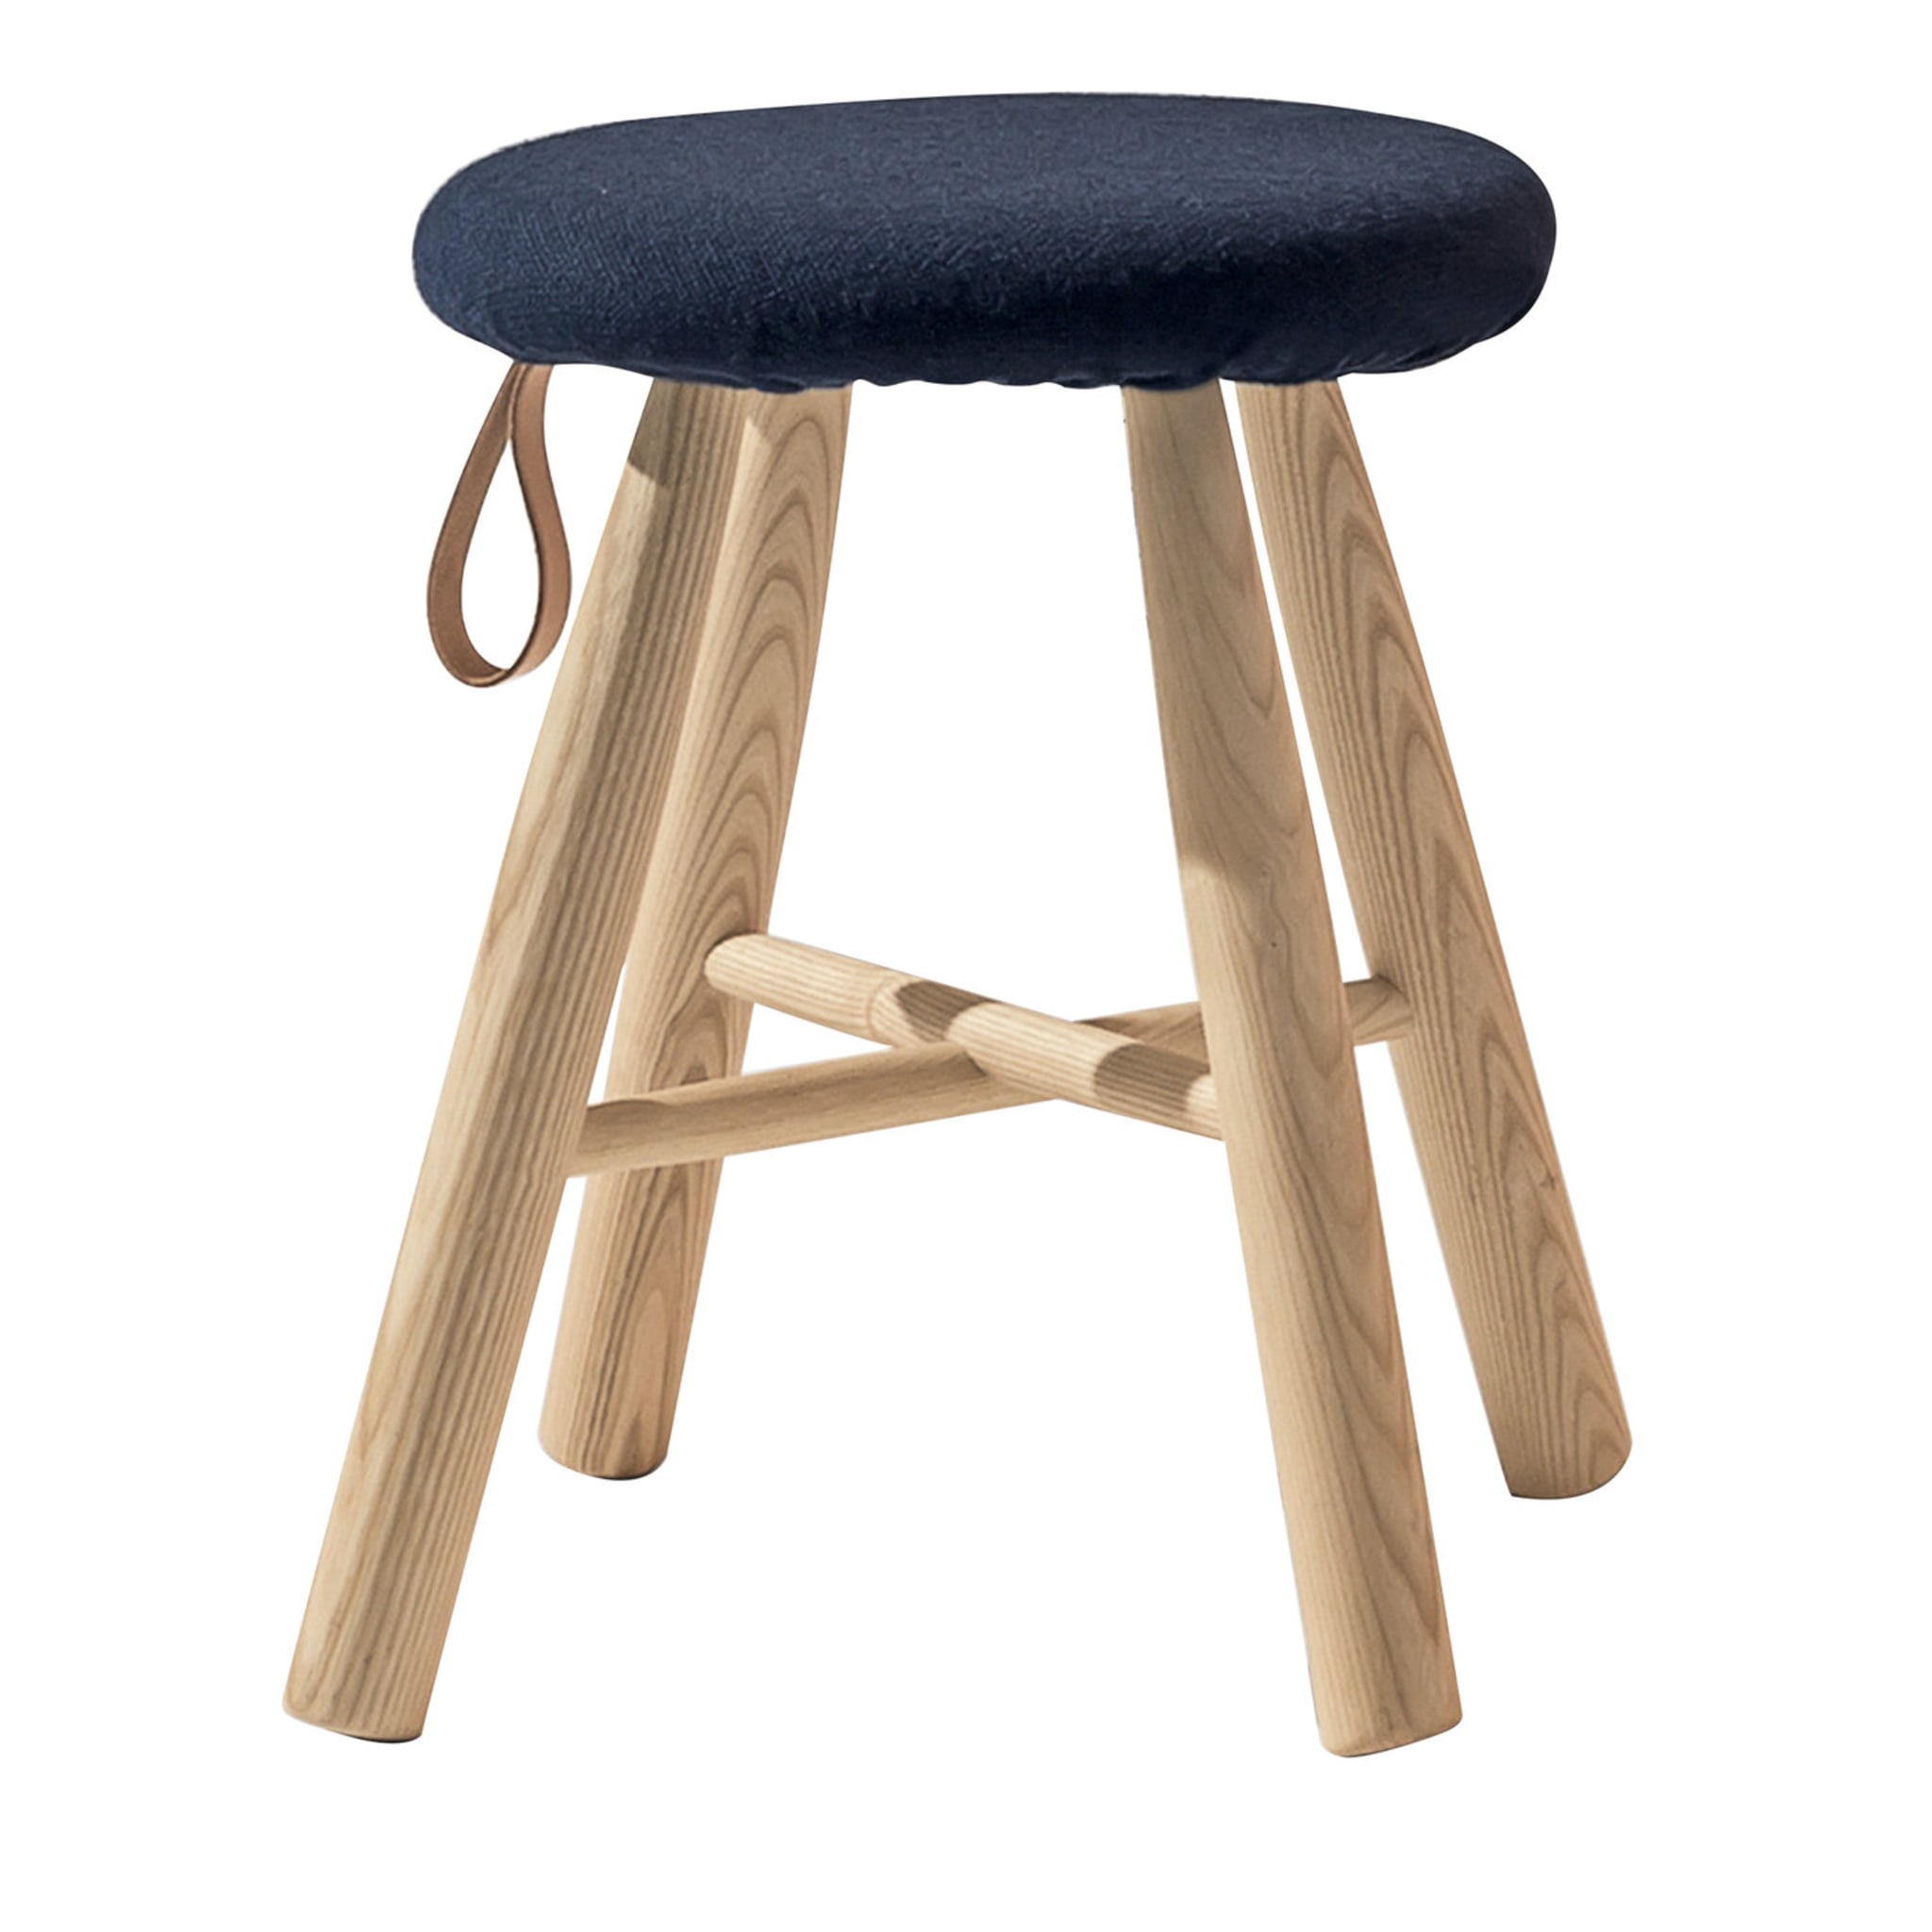 Tag Blue Low Stool - Main view